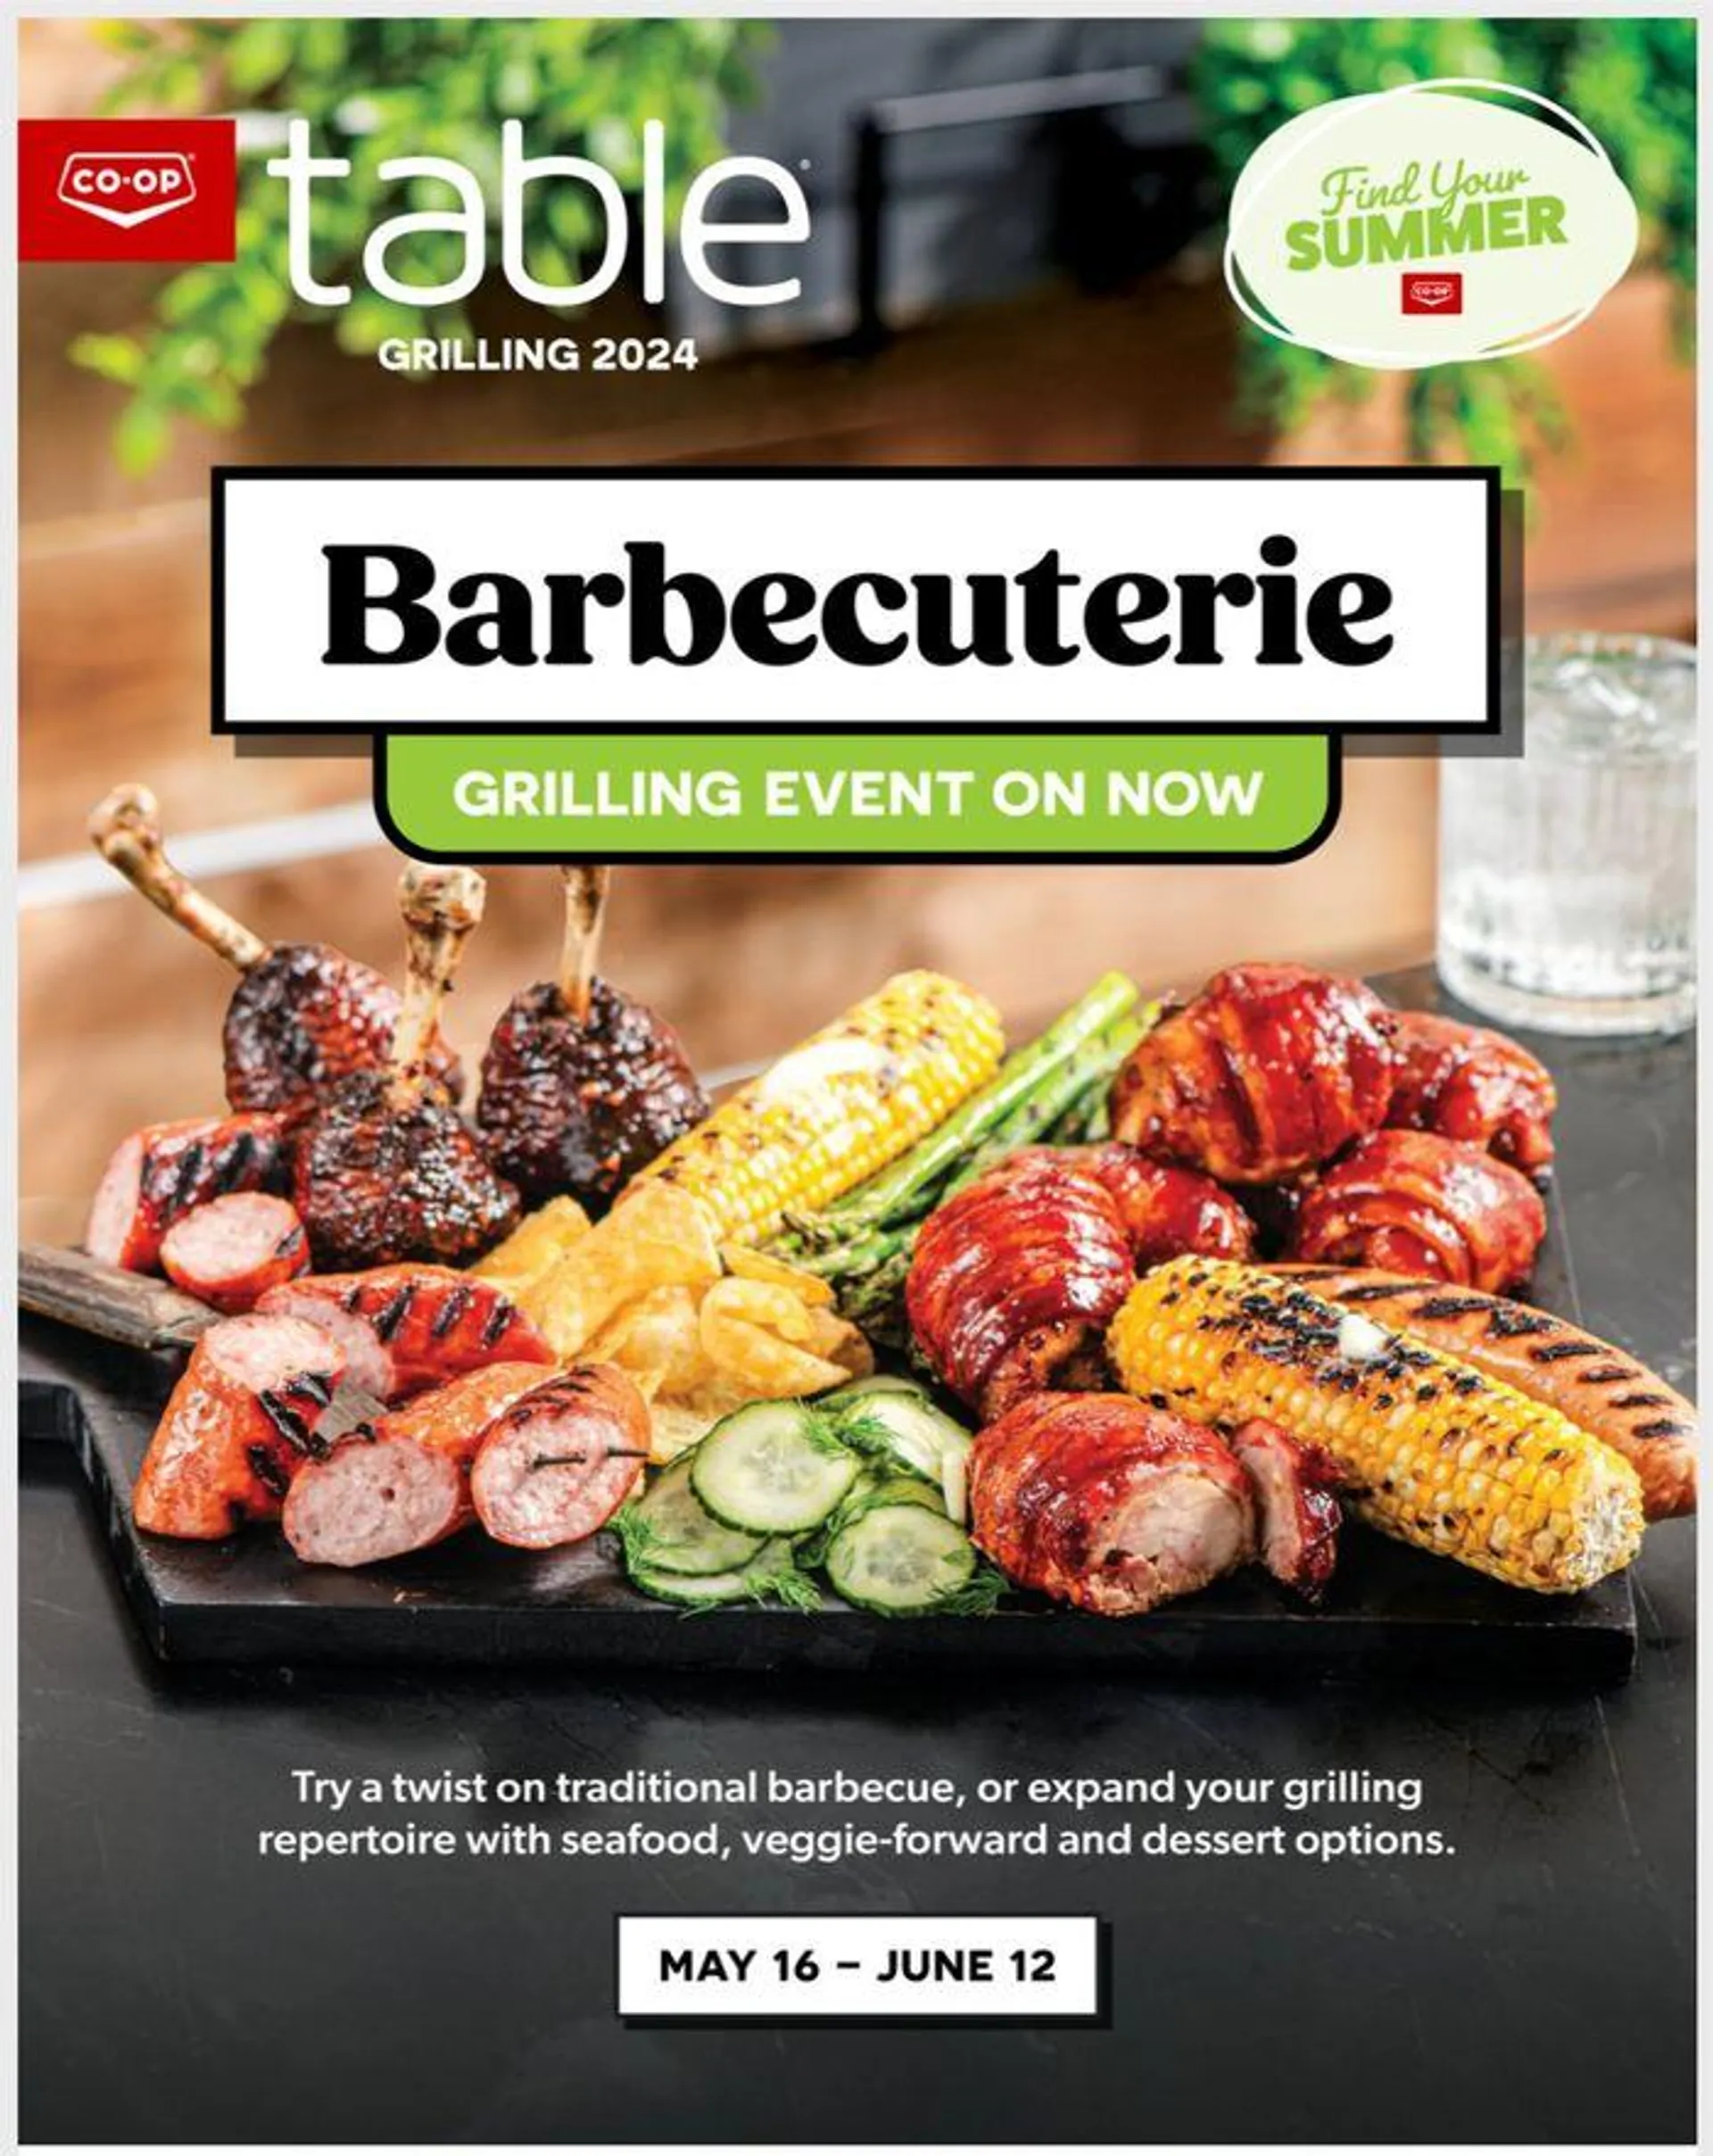 Barbecuterie GRILLING EVENT ON NOW - 1